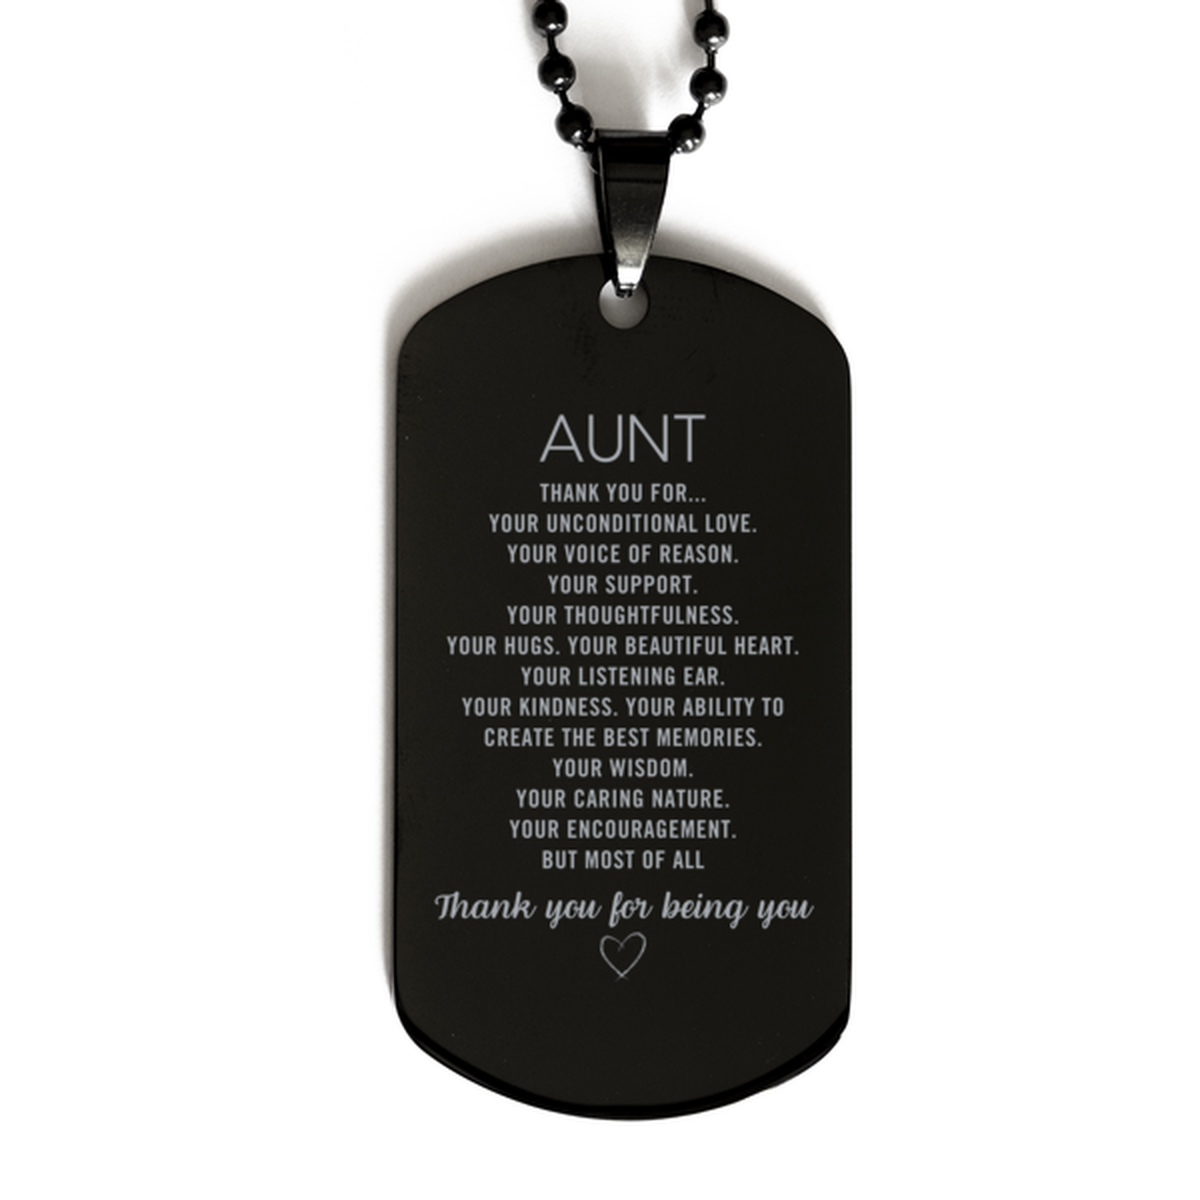 Aunt Black Dog Tag Custom, Engraved Gifts For Aunt Christmas Graduation Birthday Gifts for Men Women Aunt Thank you for Your unconditional love